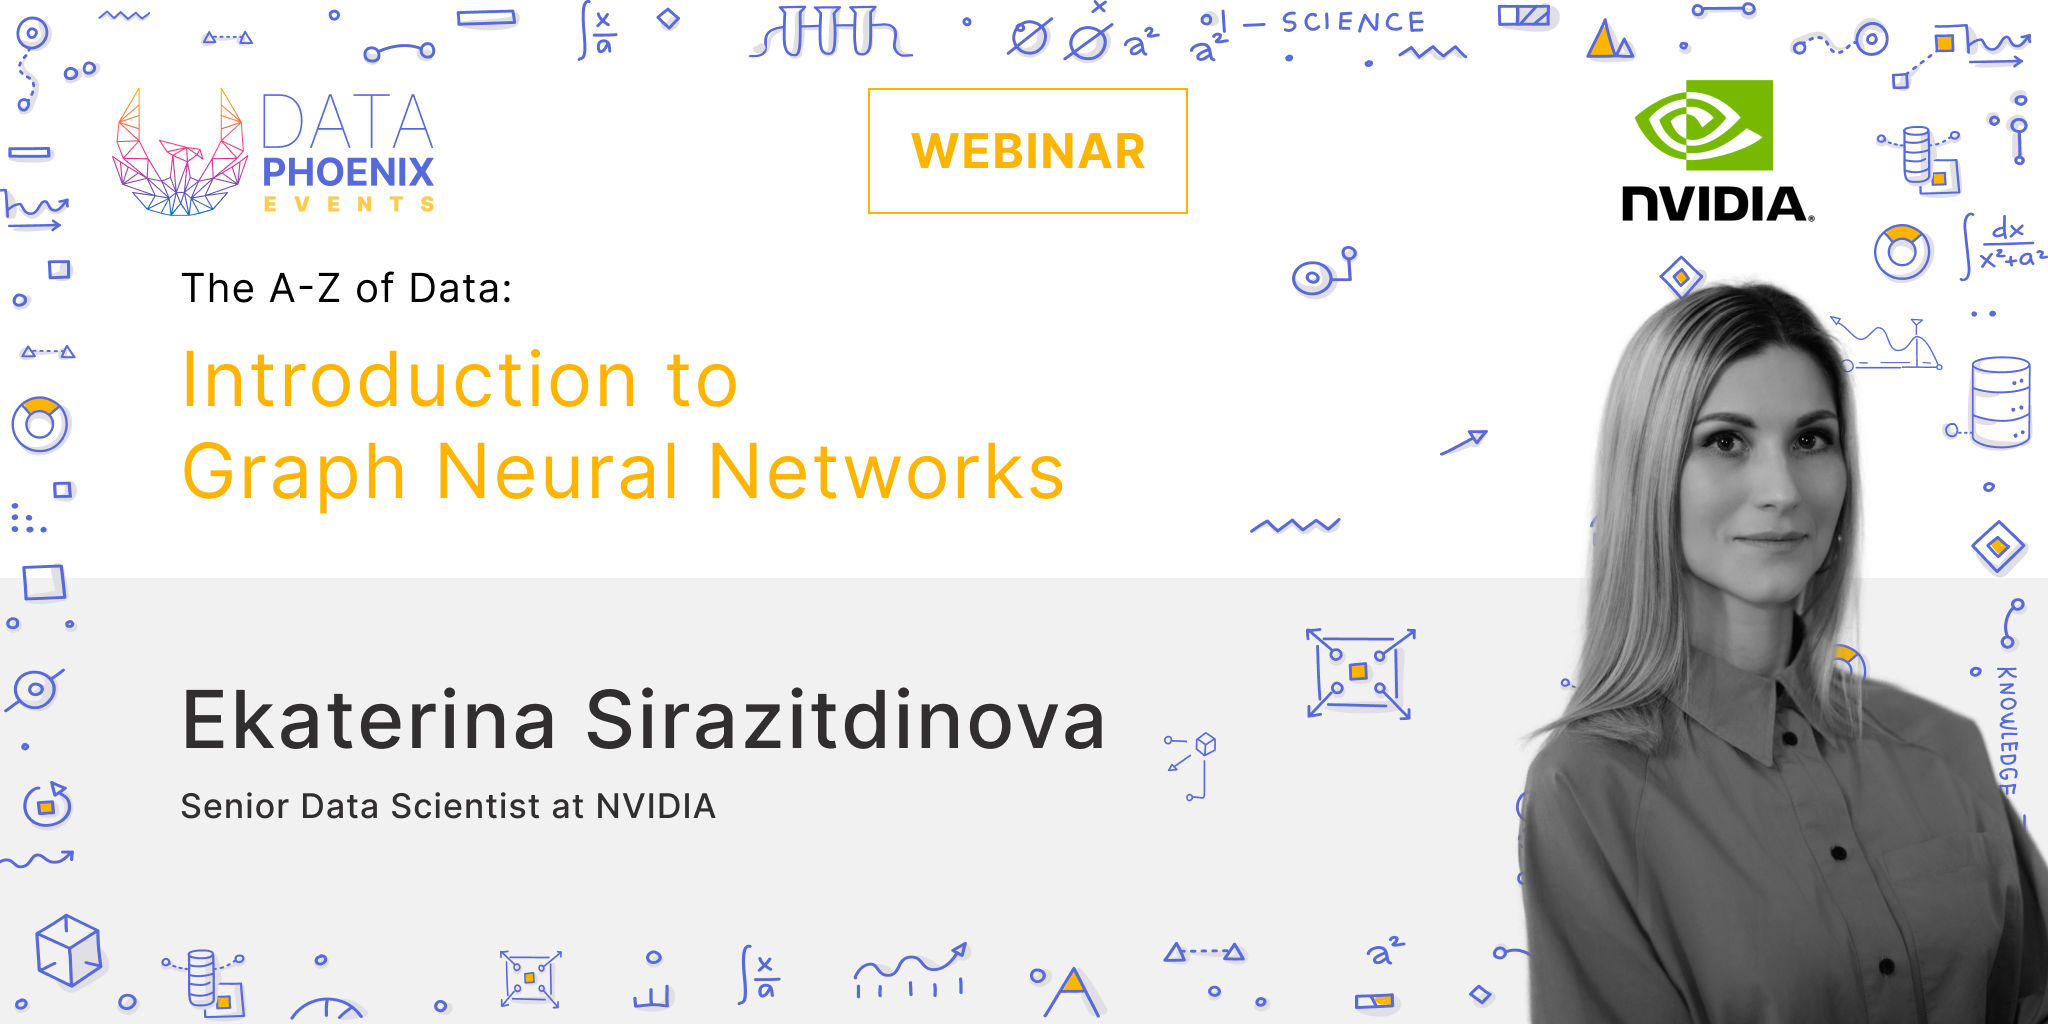 Introduction to Graph Neural Networks